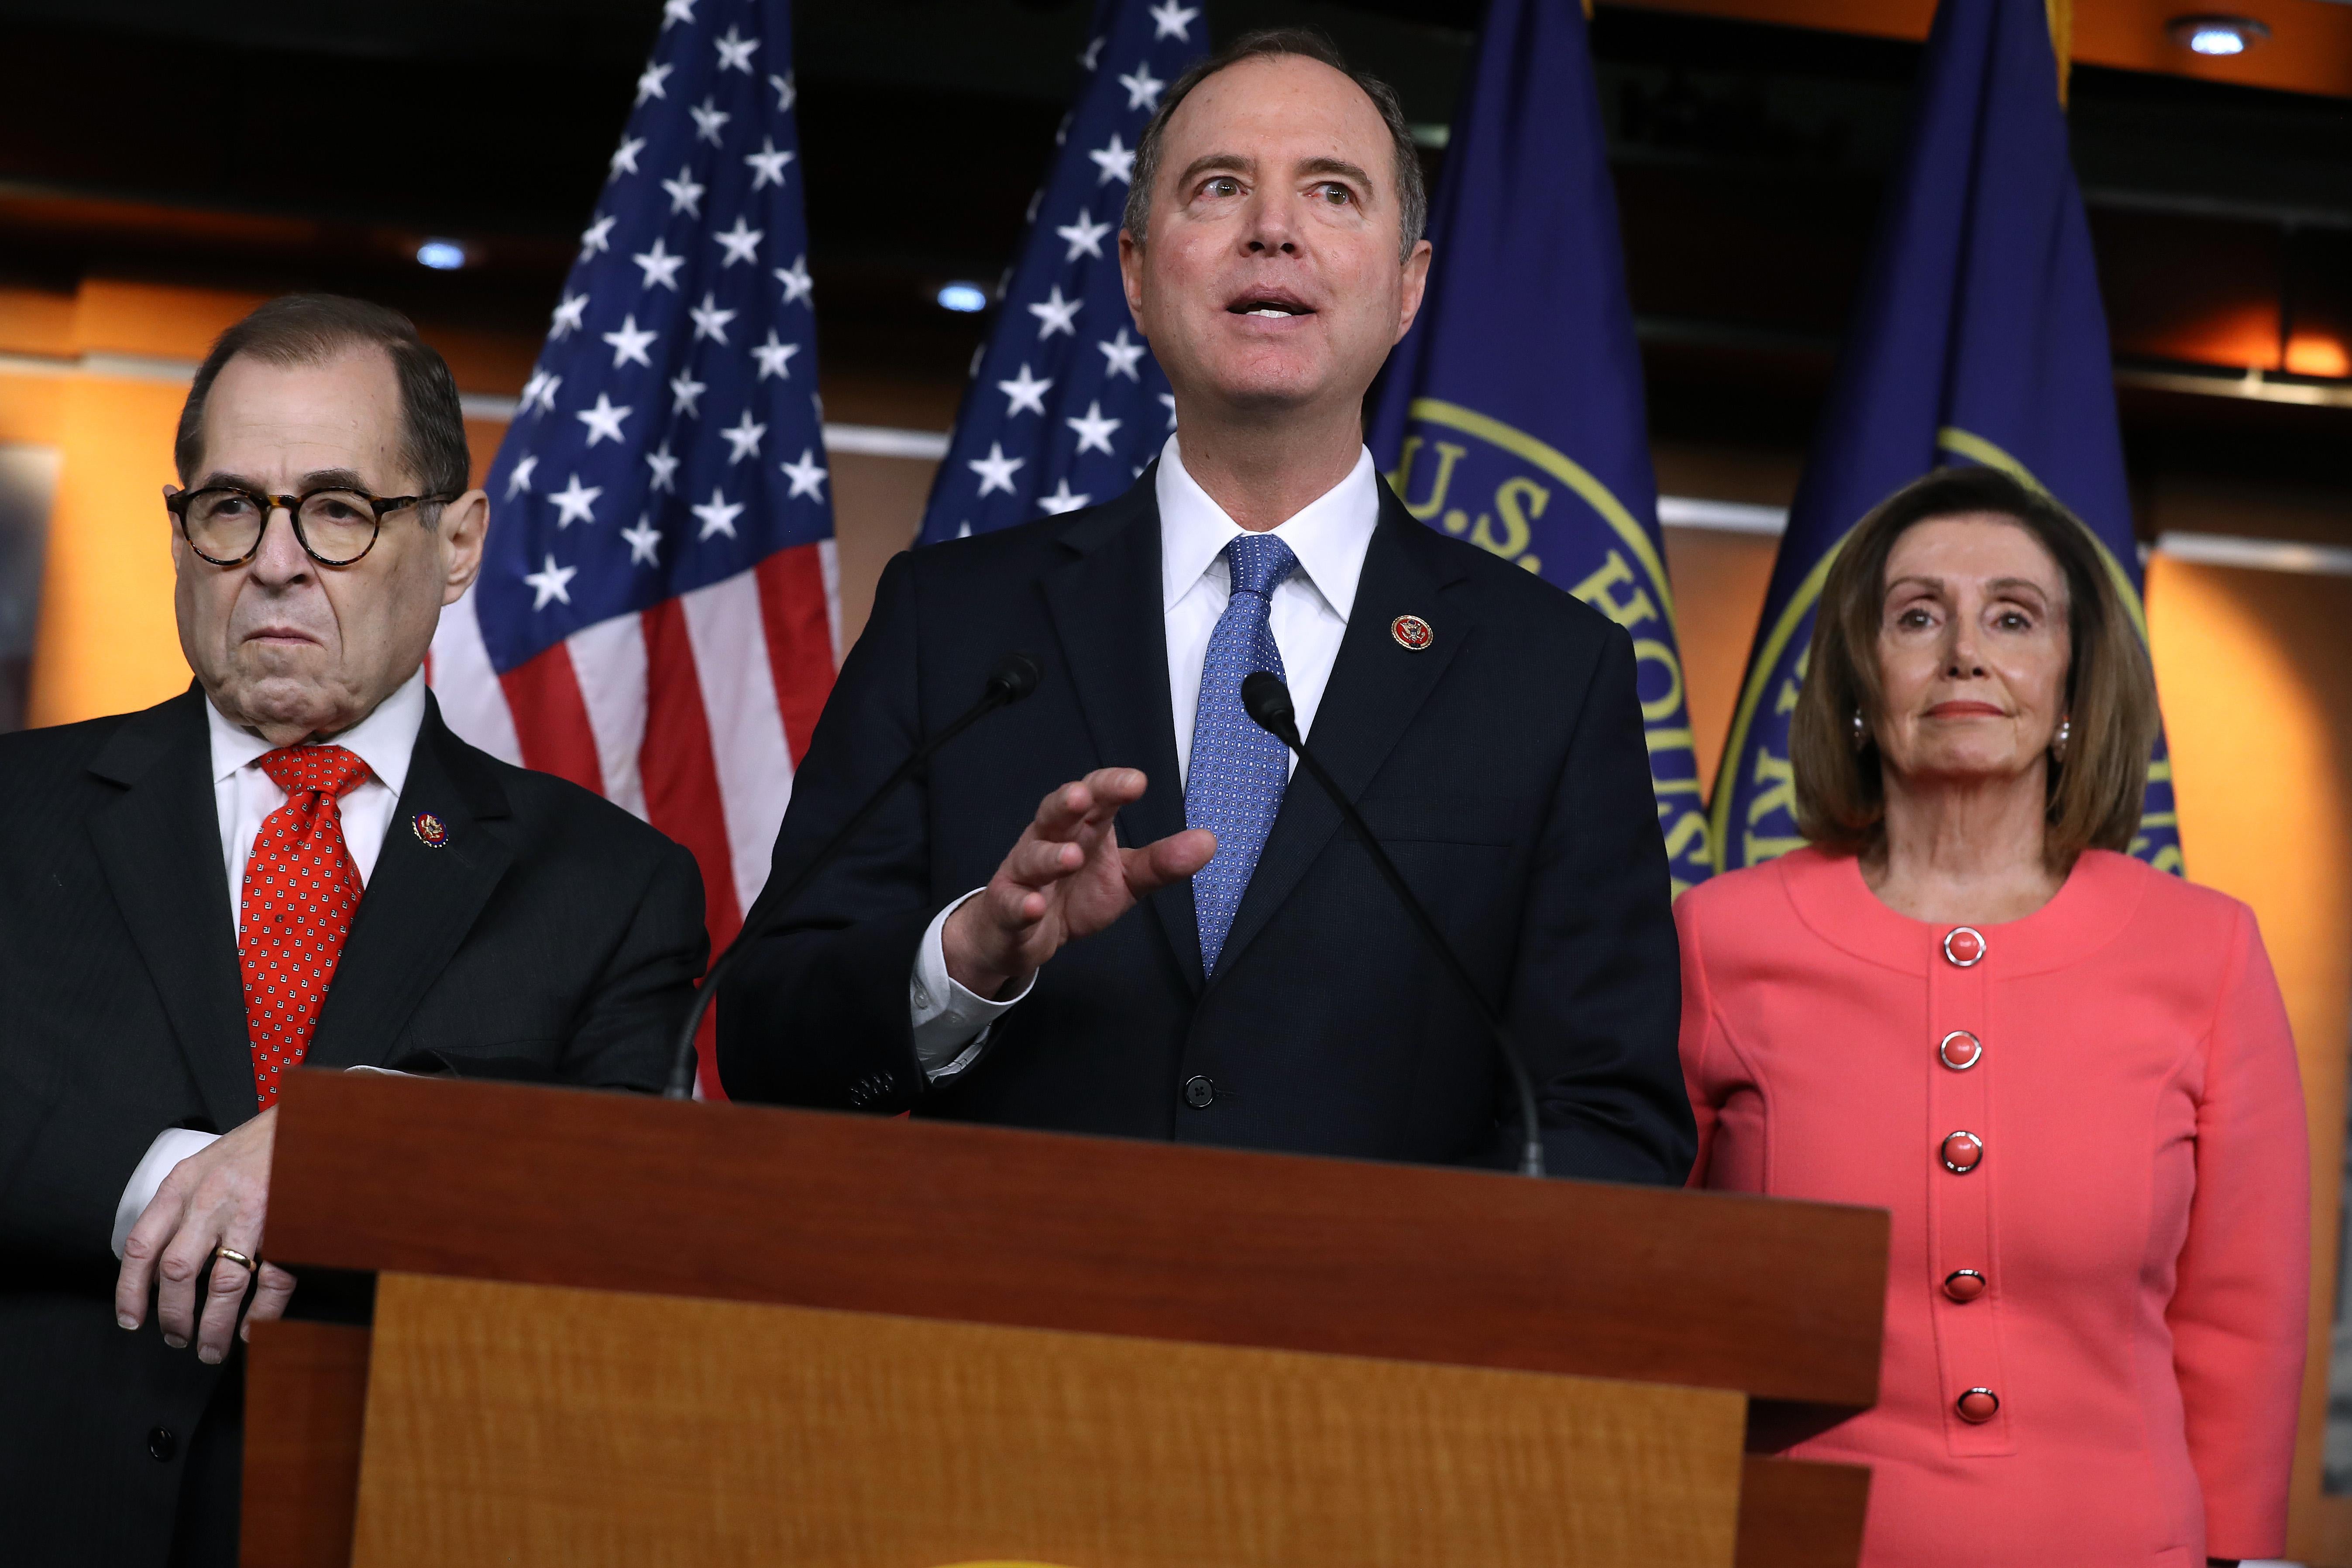 House Intelligence Committee Chairman Adam Schiff (D-CA) (C) speaks after U.S. Speaker of the House Nancy Pelosi (D-CA) (R) announces that he and House Judiciary Committee Chairman Jerrold Nadler (D-NY) and five additional members will be managers of the Senate impeachment trial of President Donald Trump at the U.S. Capitol January 15, 2020 in Washington, D.C. 